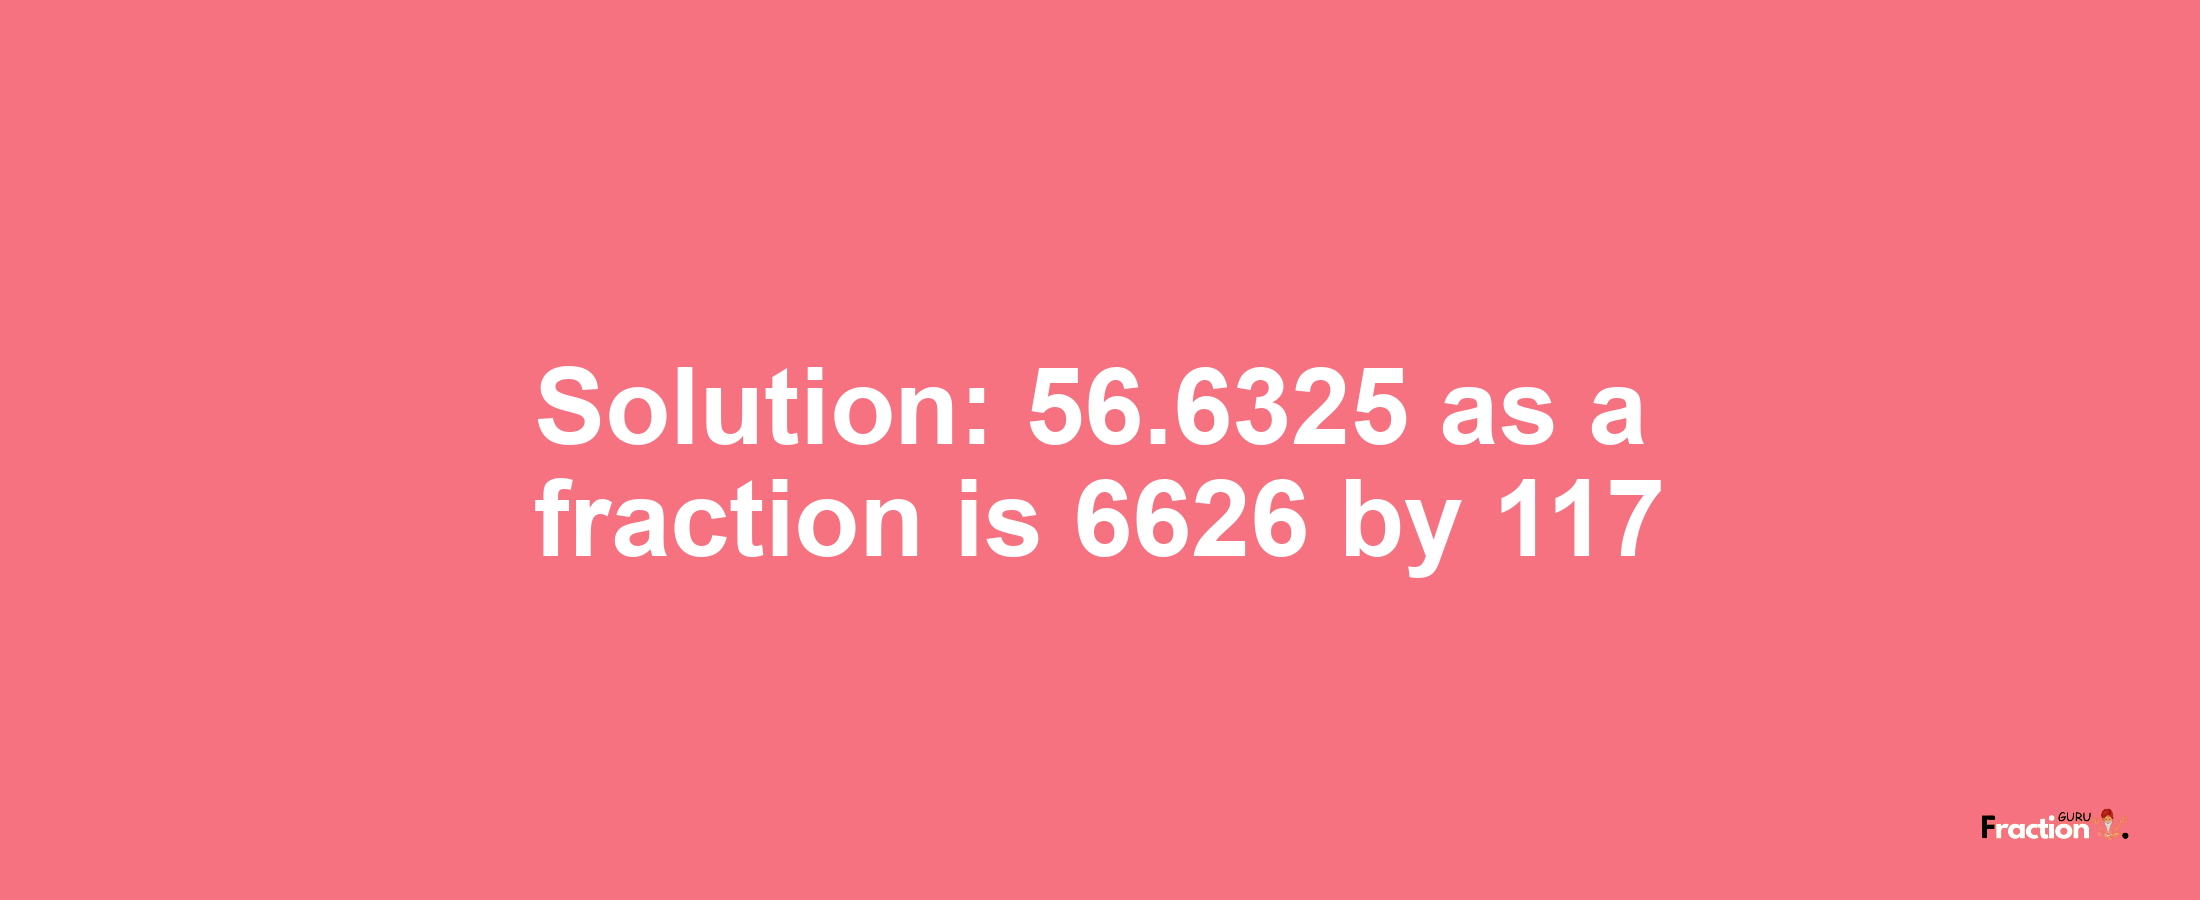 Solution:56.6325 as a fraction is 6626/117